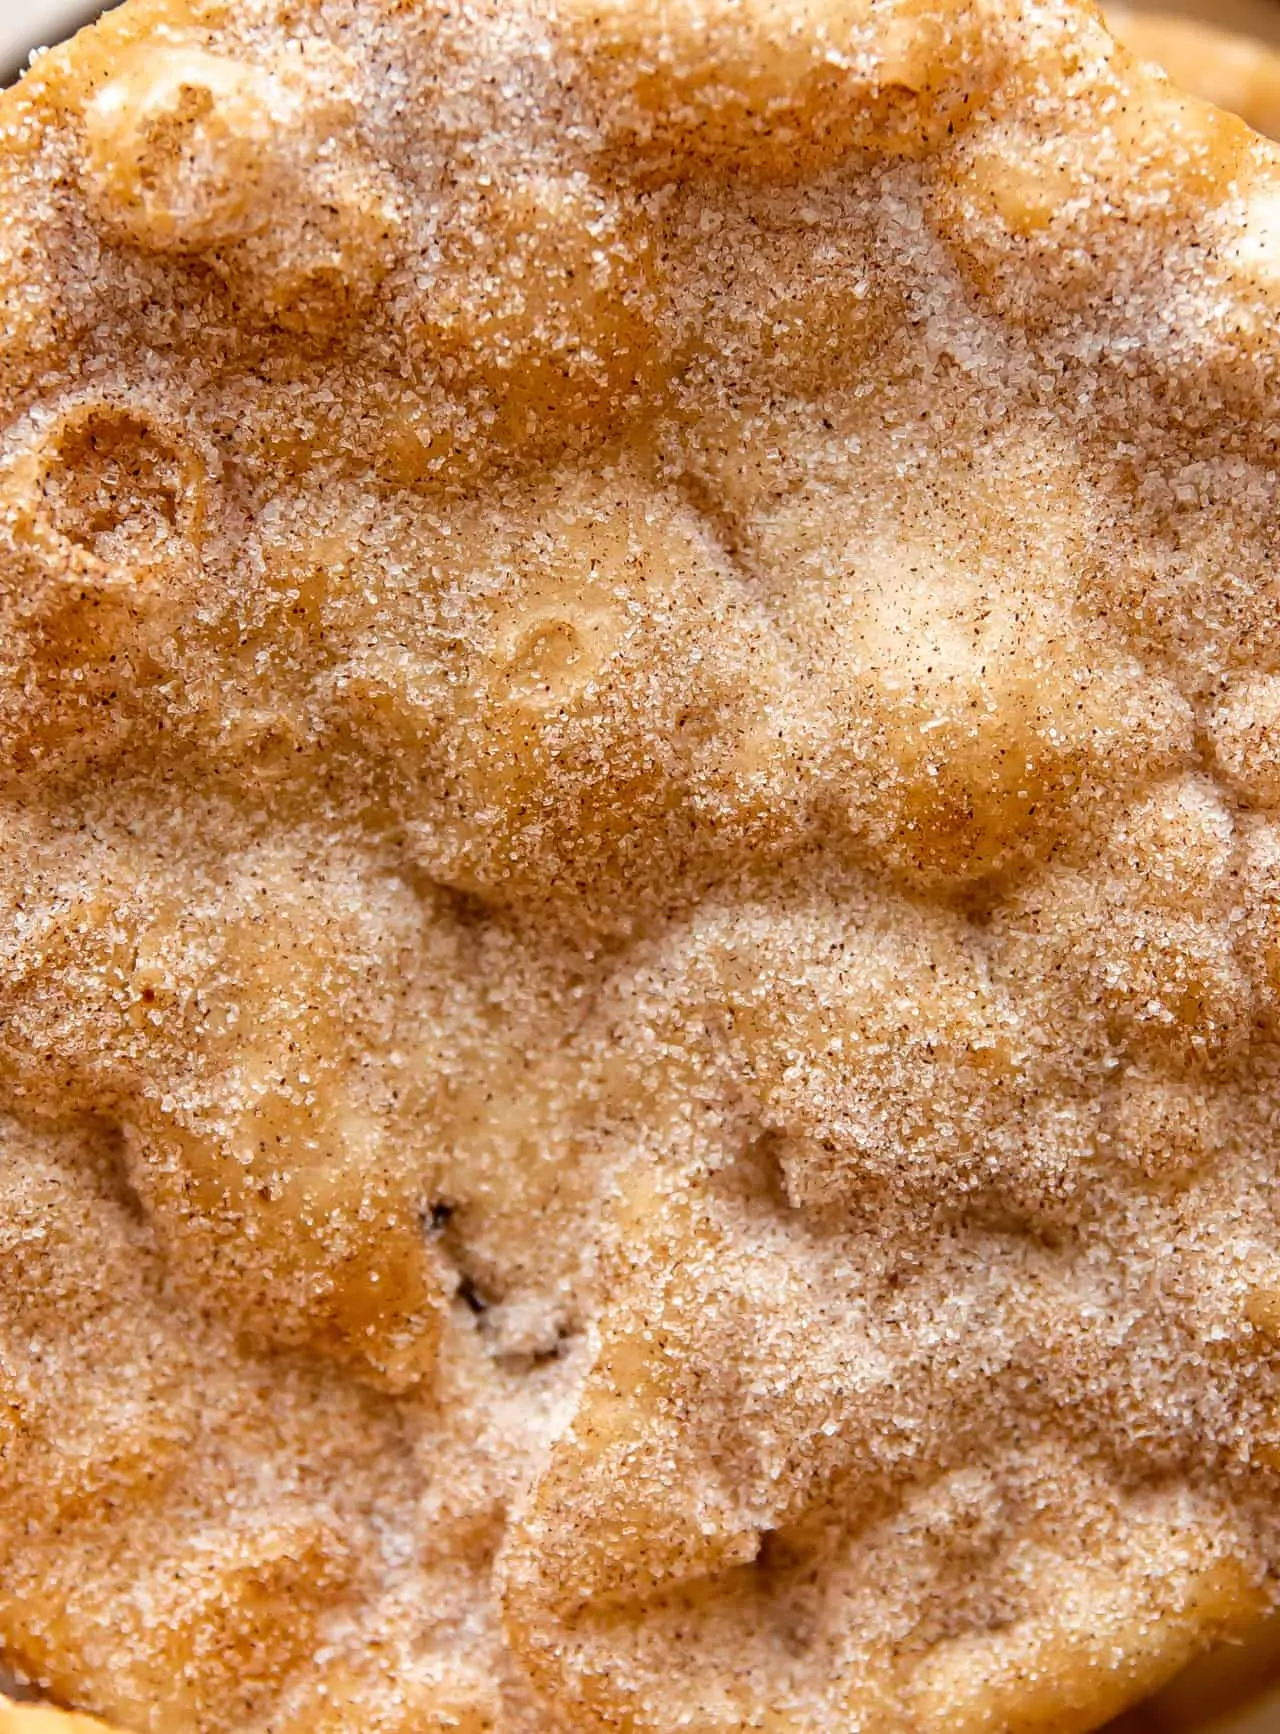 Up close view of bunuelos fried and coated with cinnamon sugar.